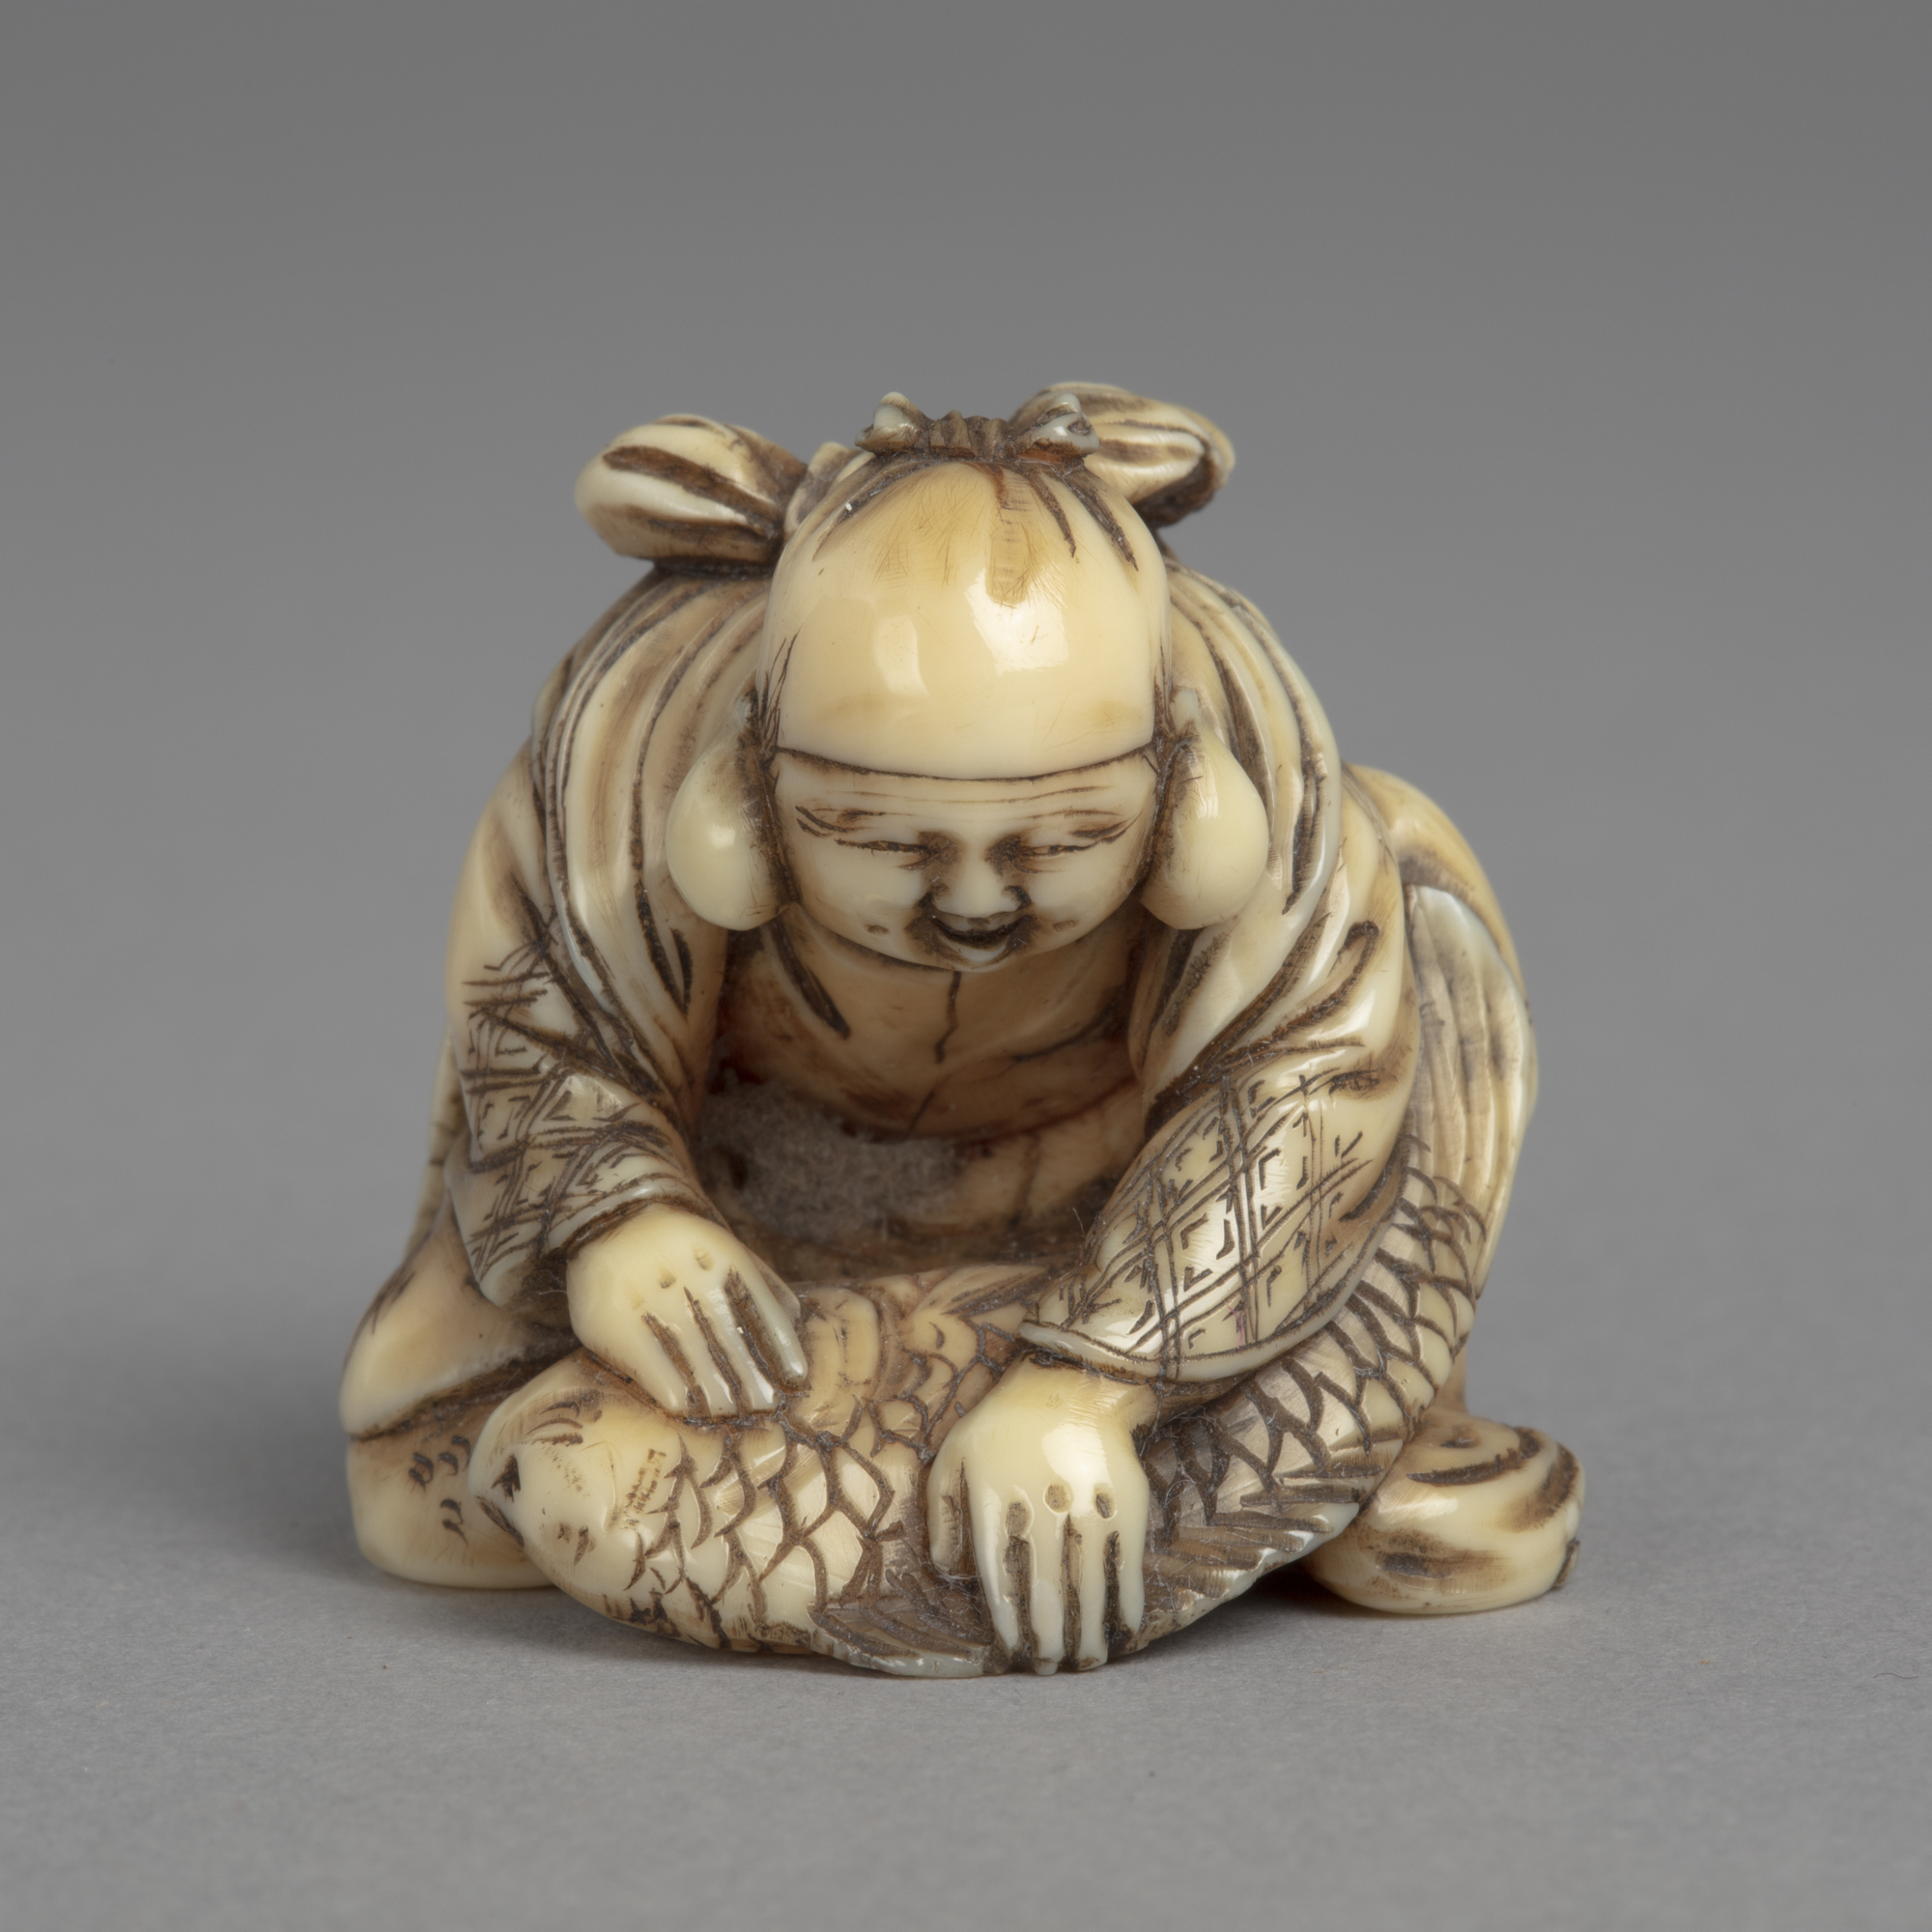 A Japanese ivory netsuke of Ebisu, one of the Seven Lucky Gods, kneeling over a large sea bream.